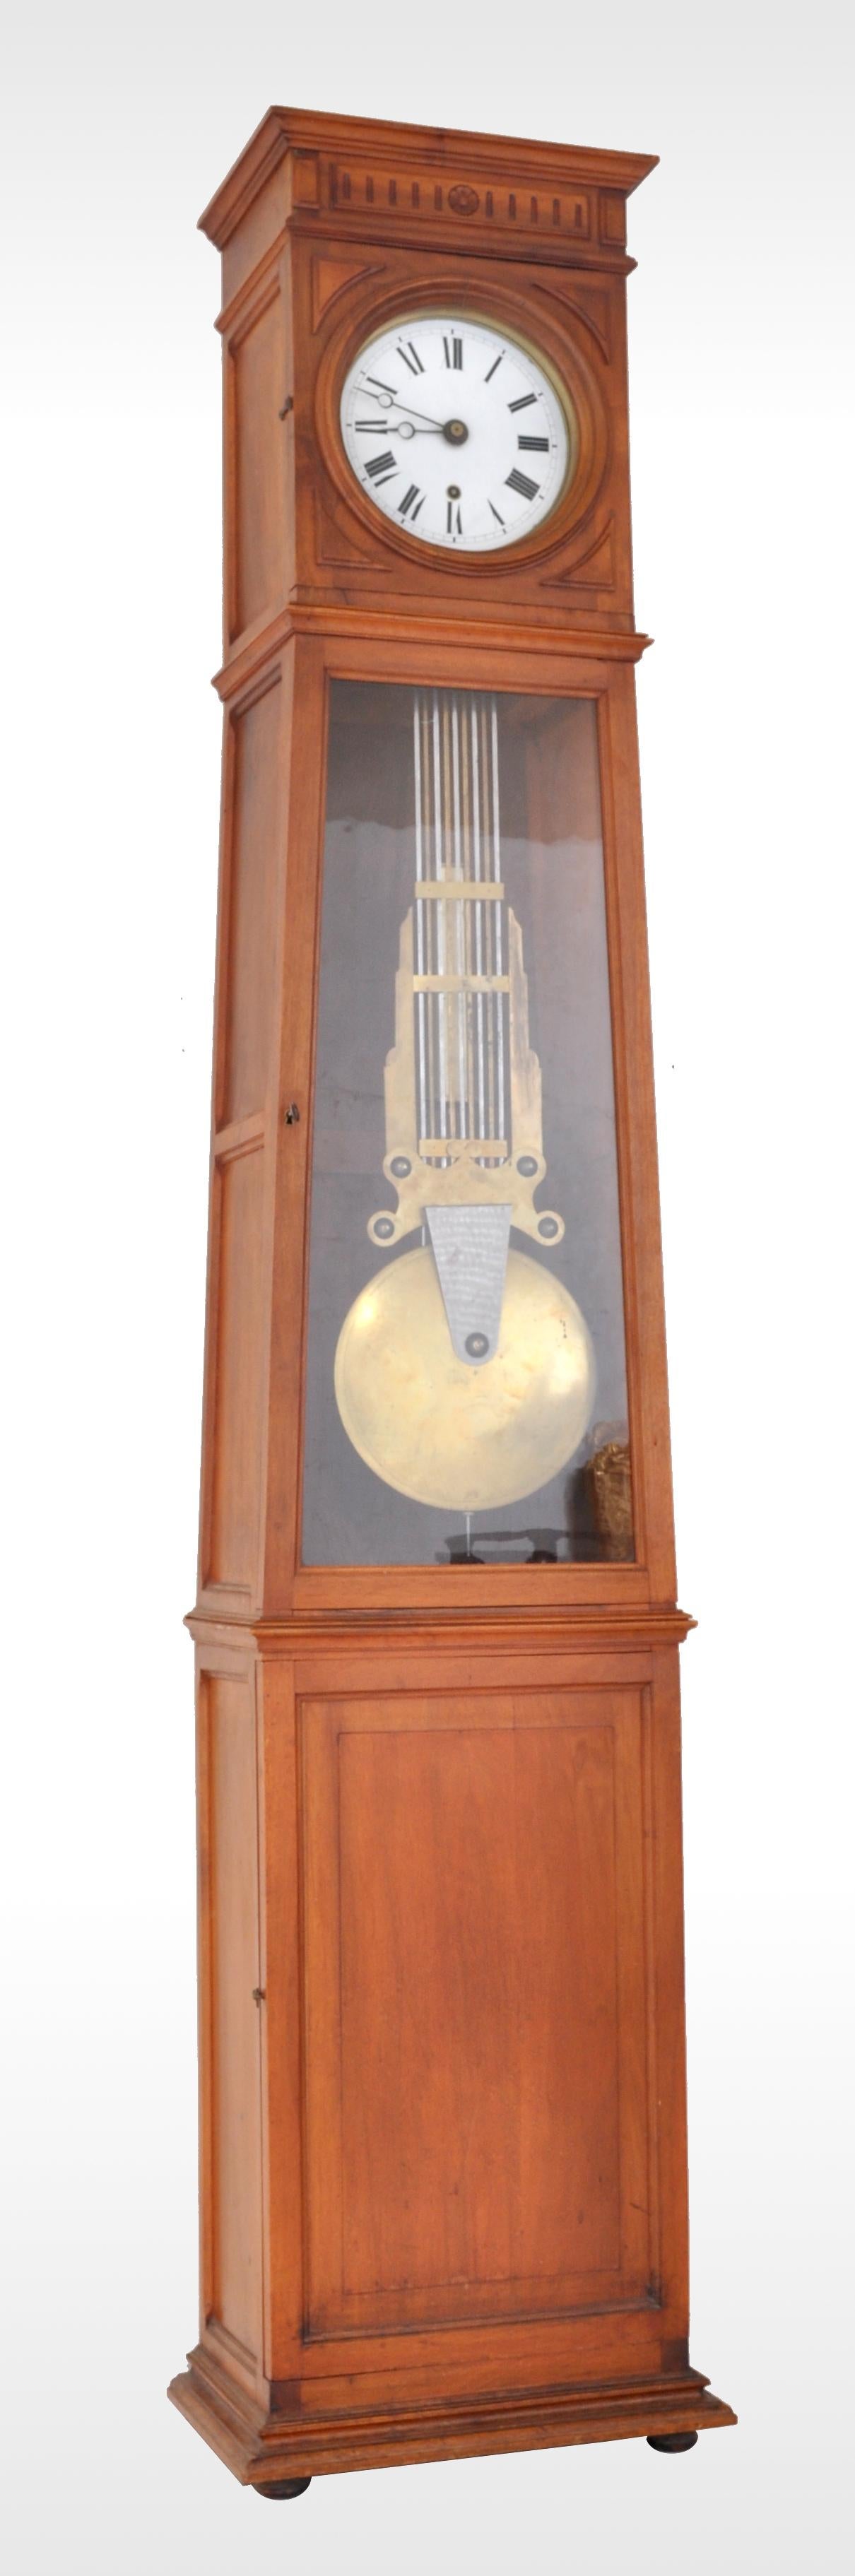 Antique French 8-day longcase/grandfather Comtoise clock, circa 1800. The clock housed in a cherrywood case and having a carved crown with a circular enameled white dial below and having black Roman numerals. The clock with a single door to the